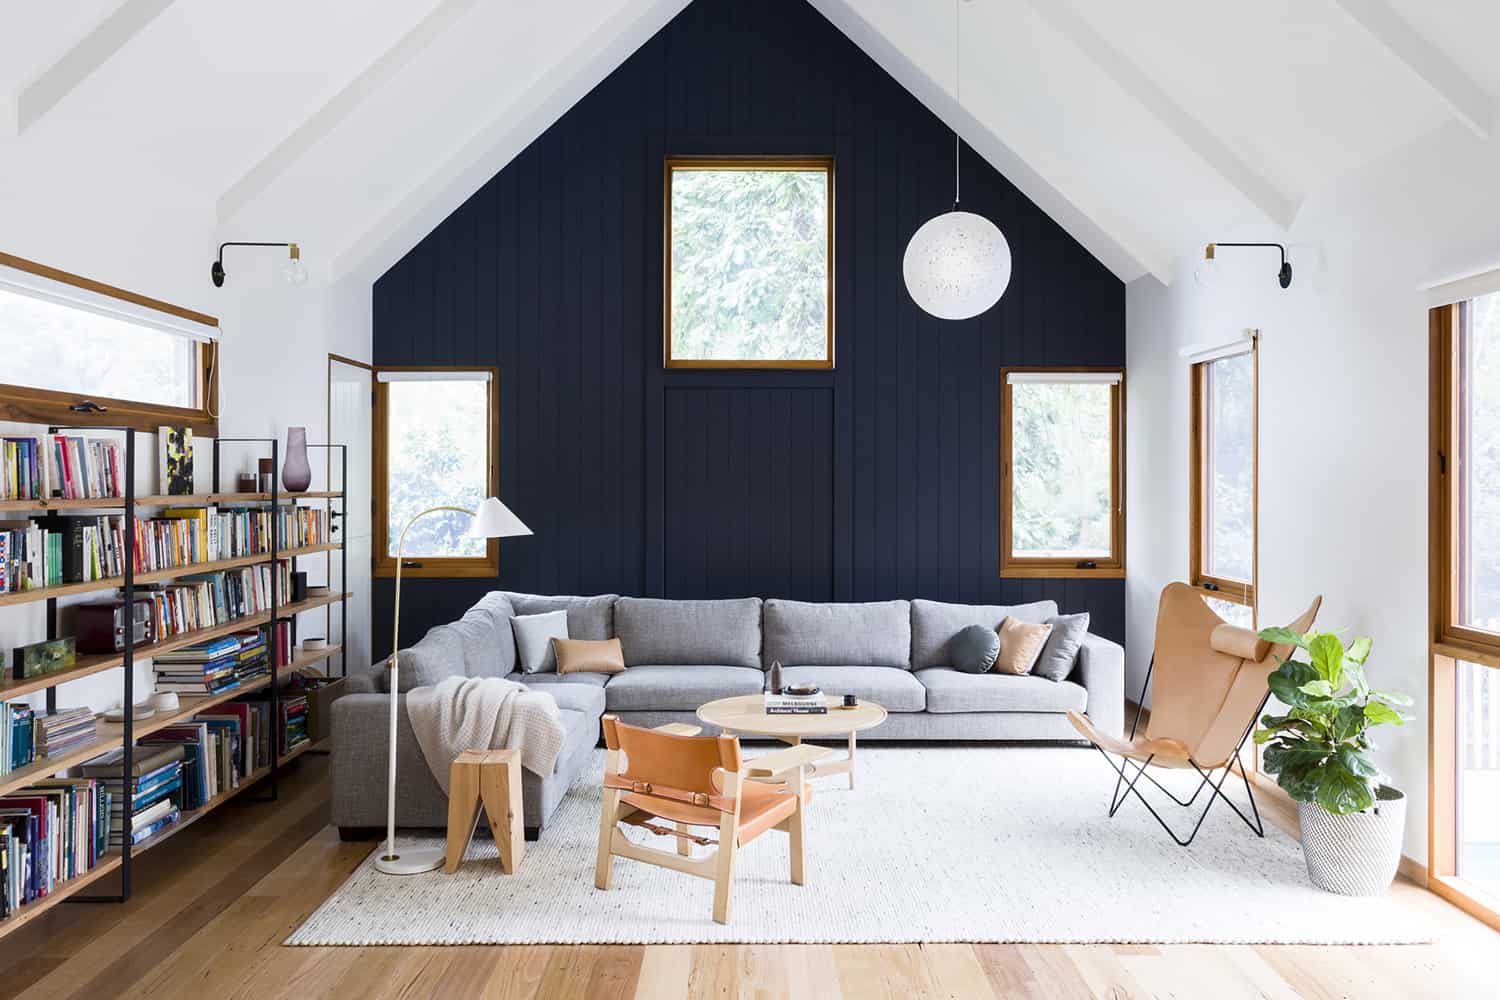 Charming historical Australian home gets barn style addition